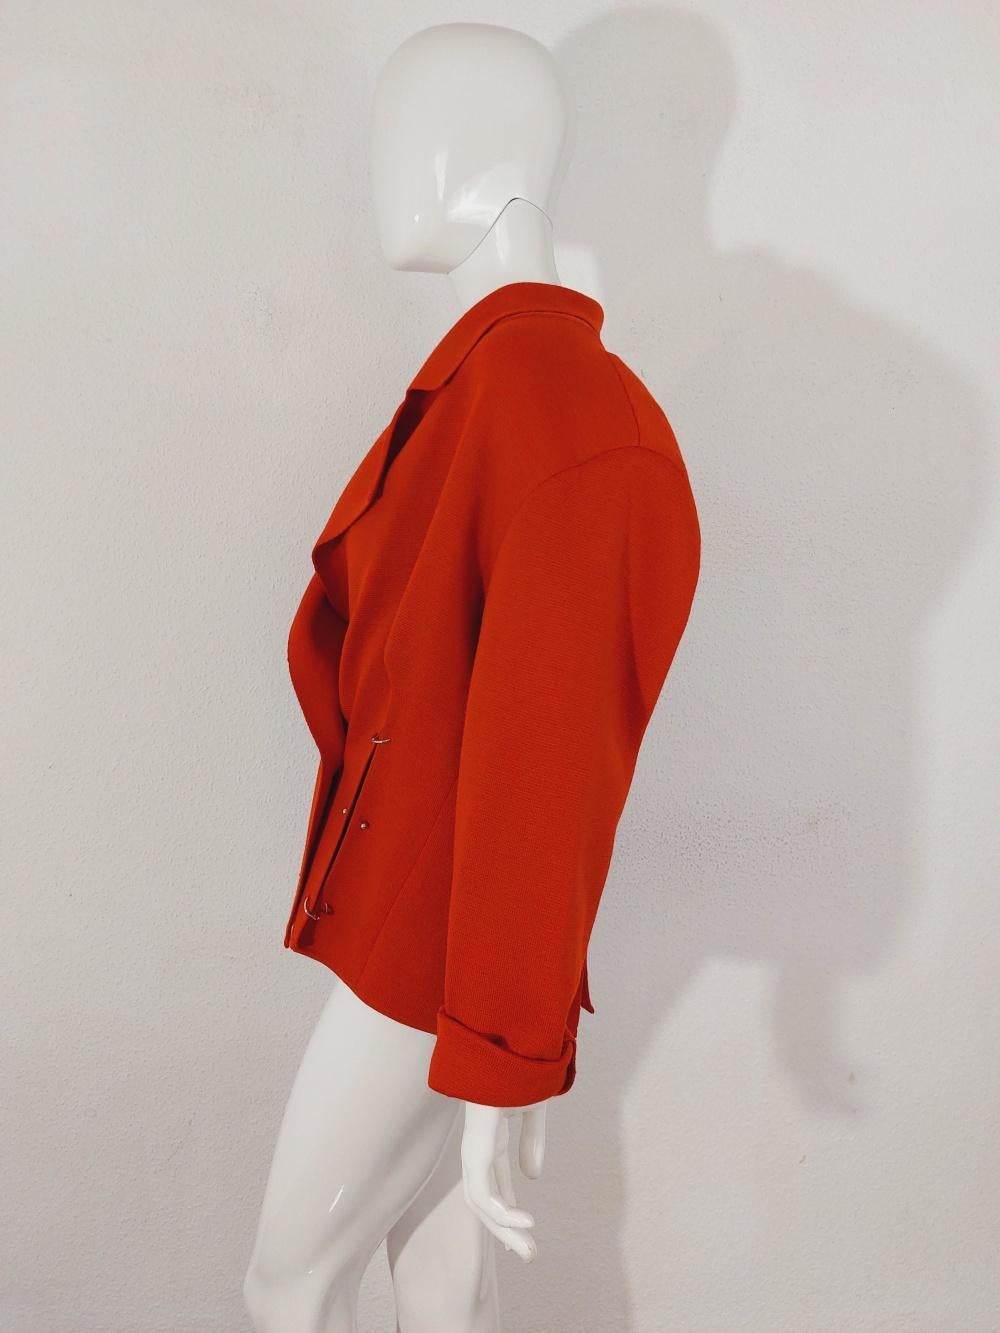 Issey Miyake Pleats Please Red Piercing Punk Deconstructed Rivet Coat Jacket For Sale 2